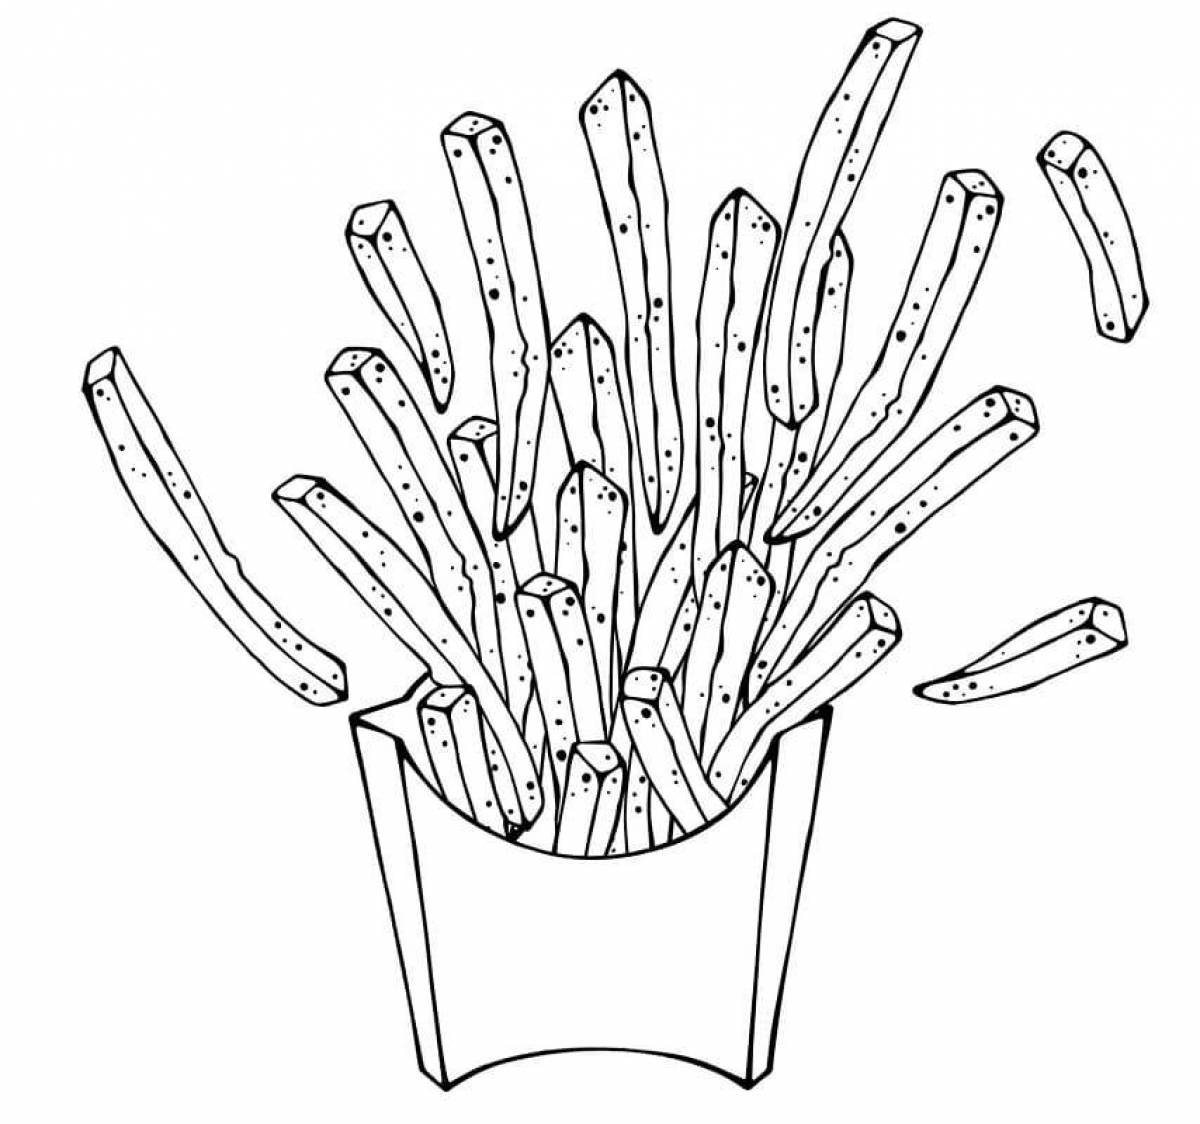 French fries teasing coloring book